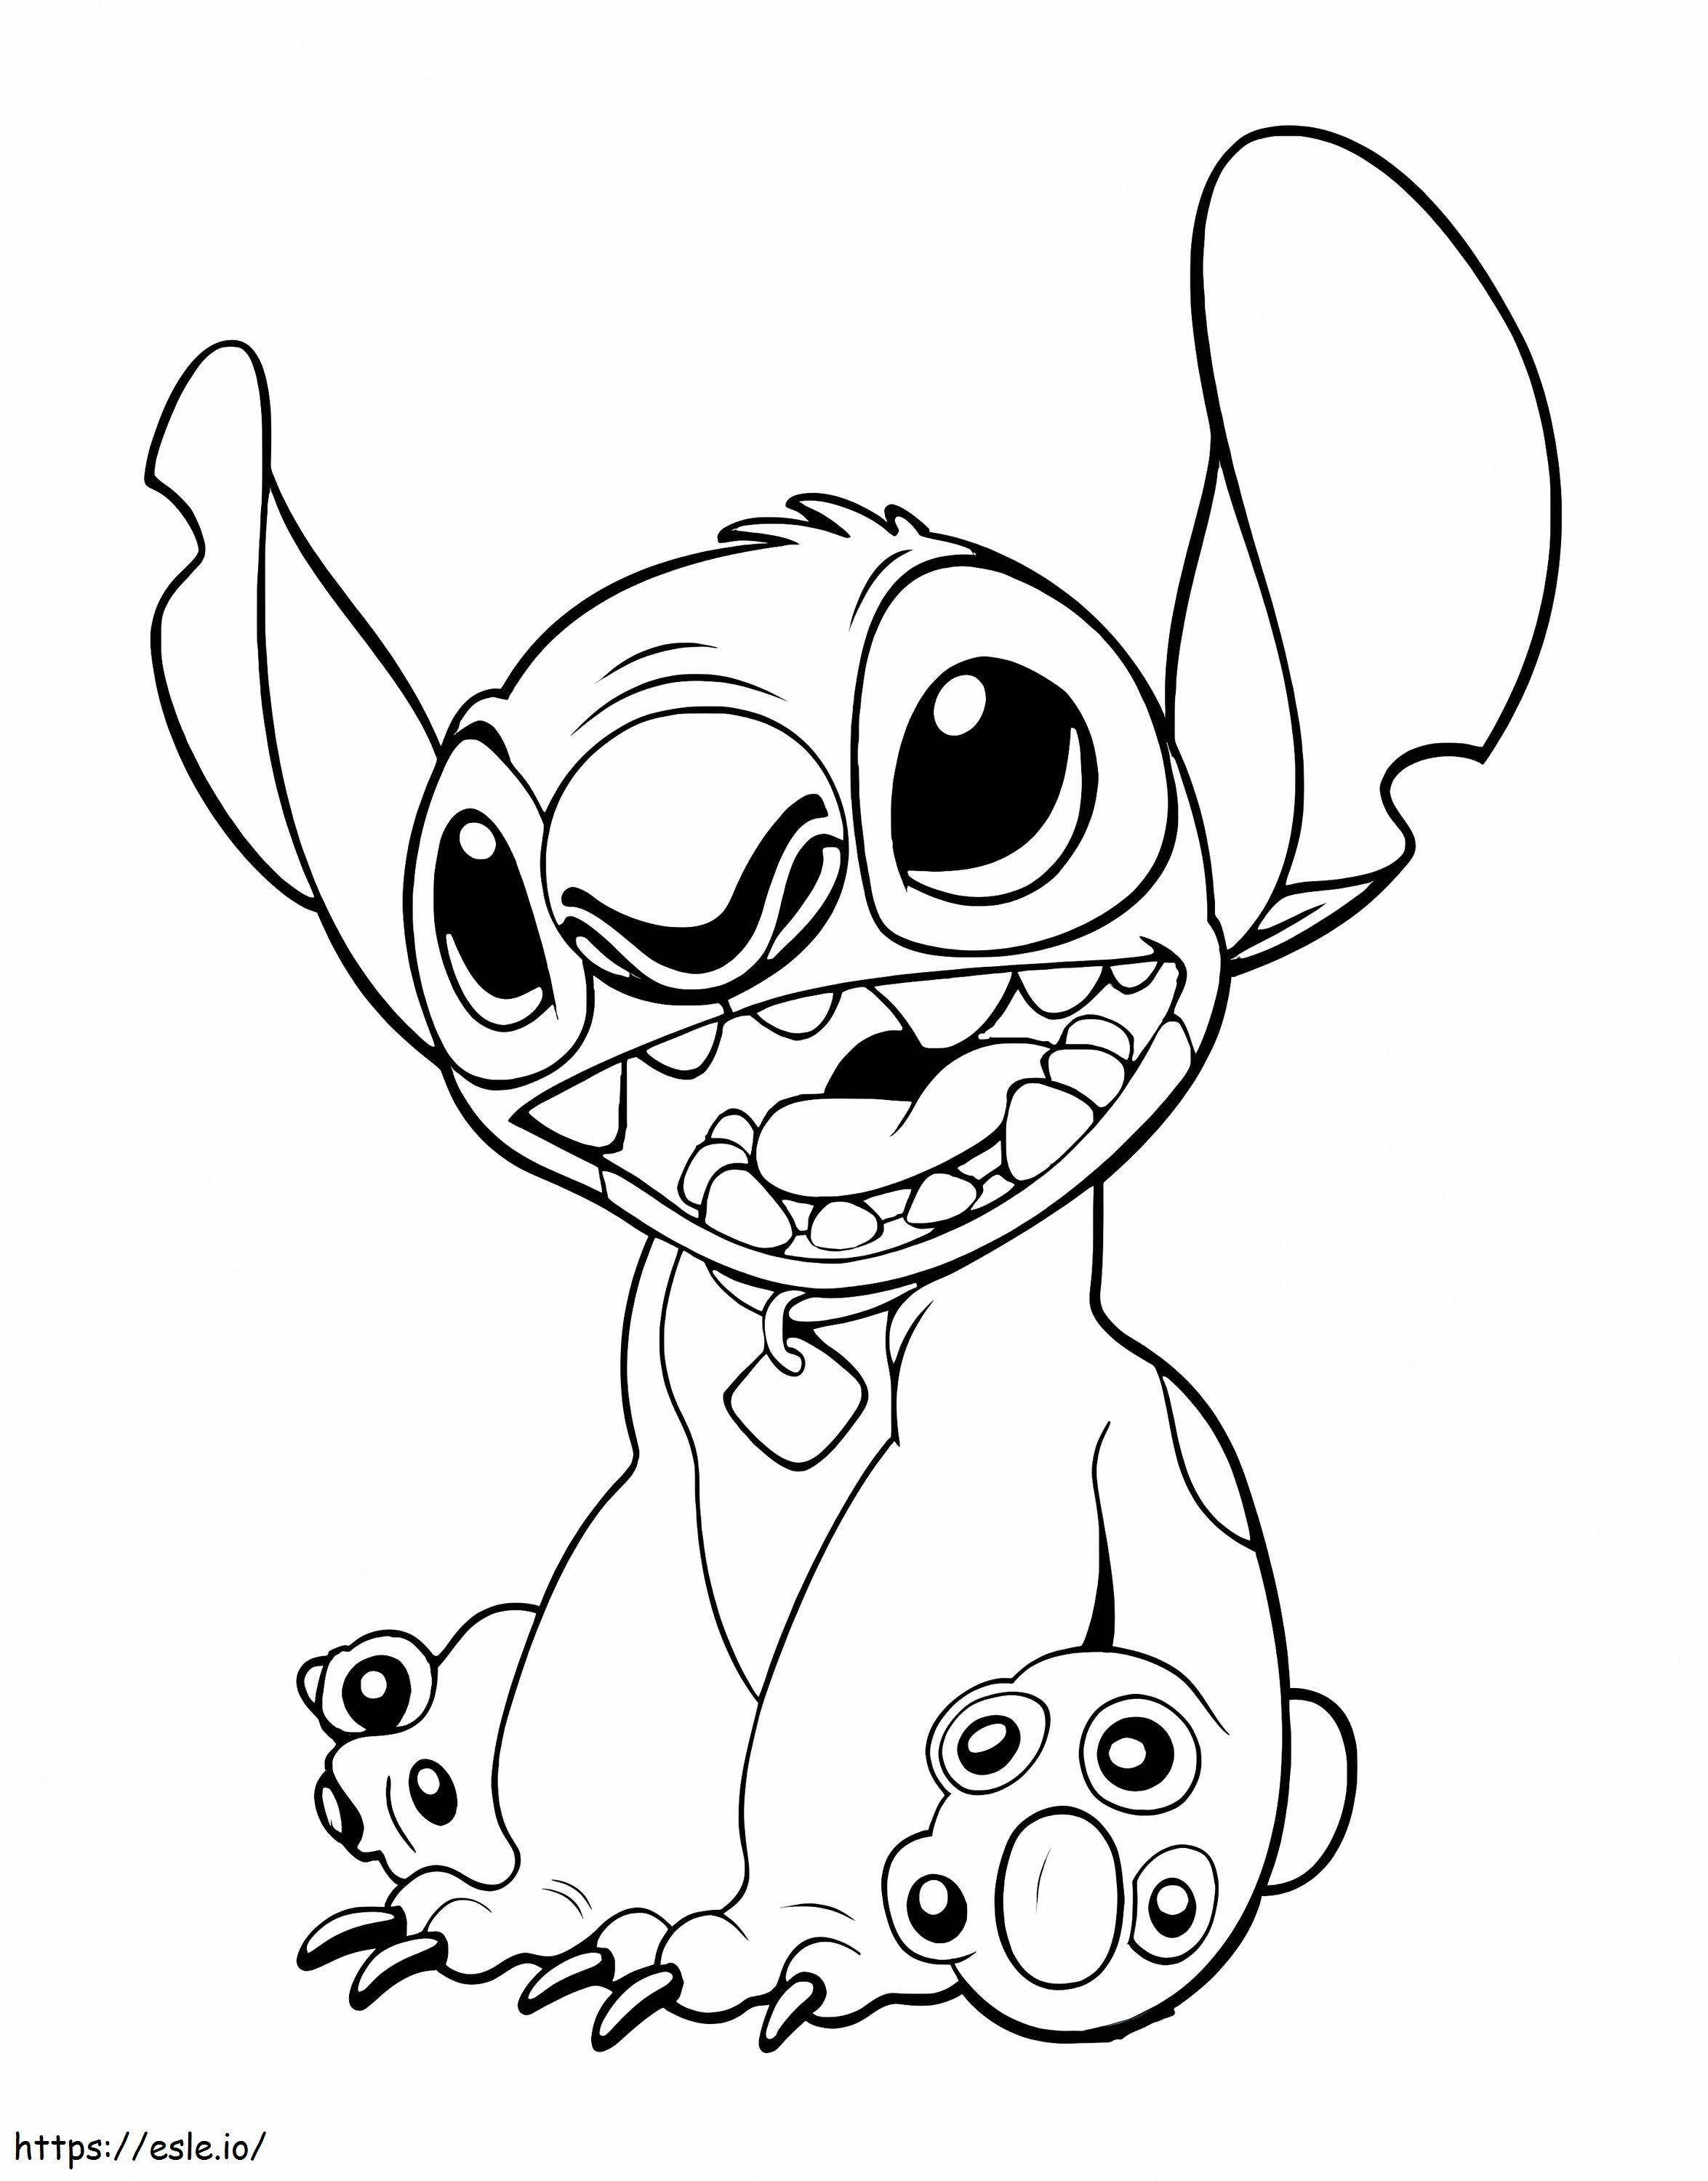 Stitch 5 coloring page